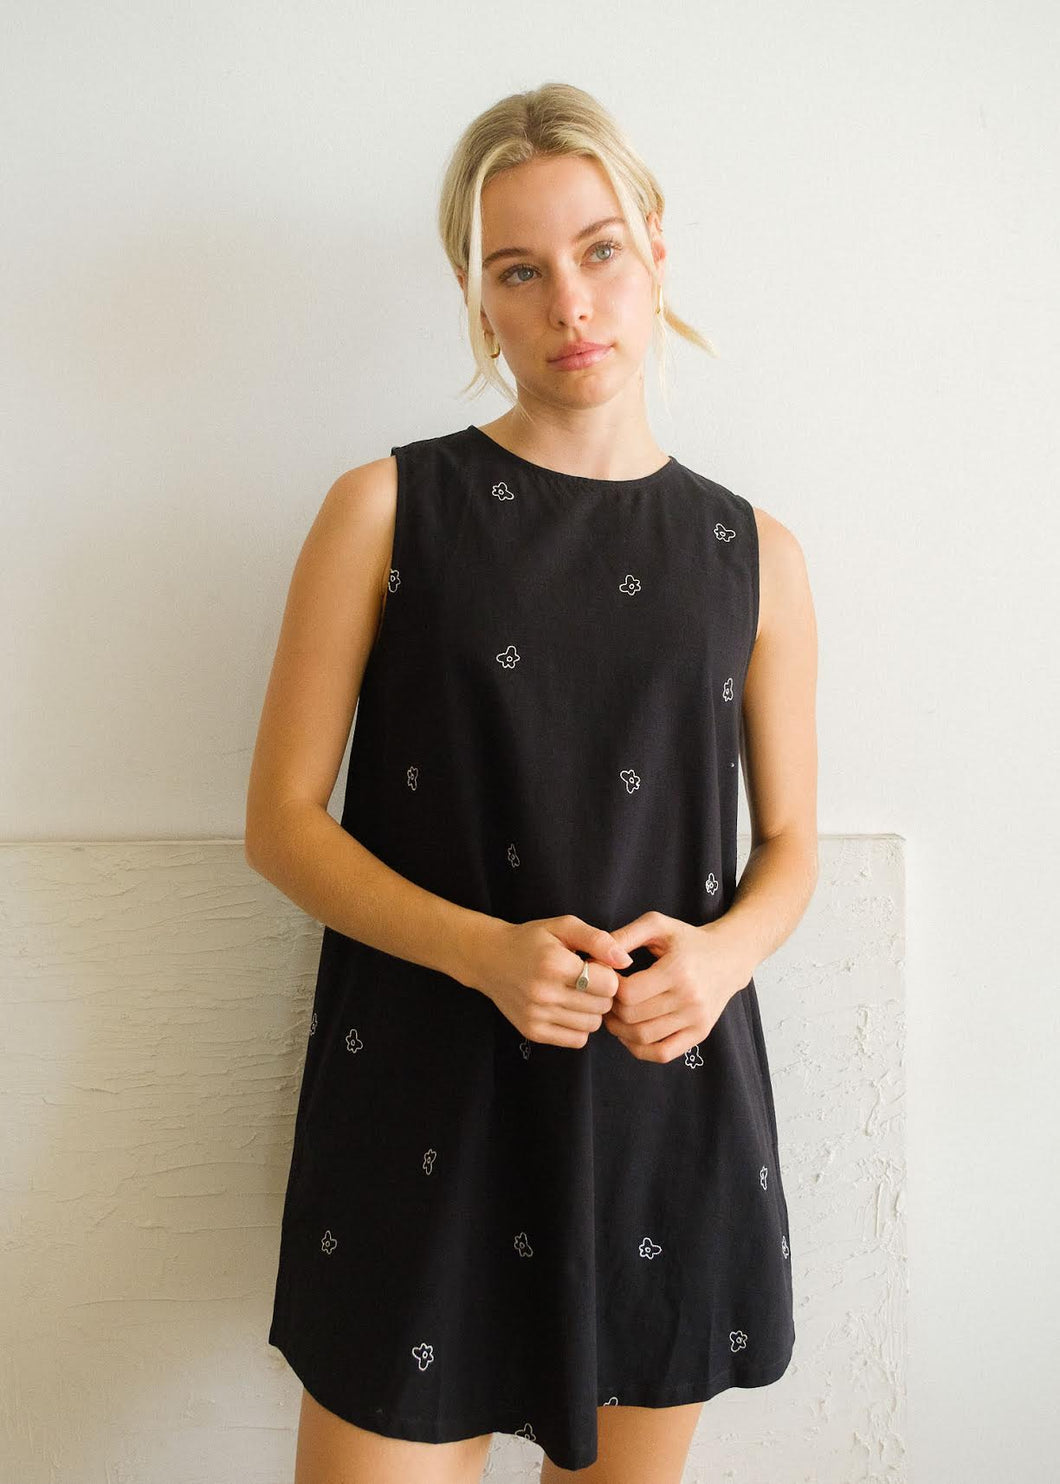 Black Shift Dress With Embroidered Flowers